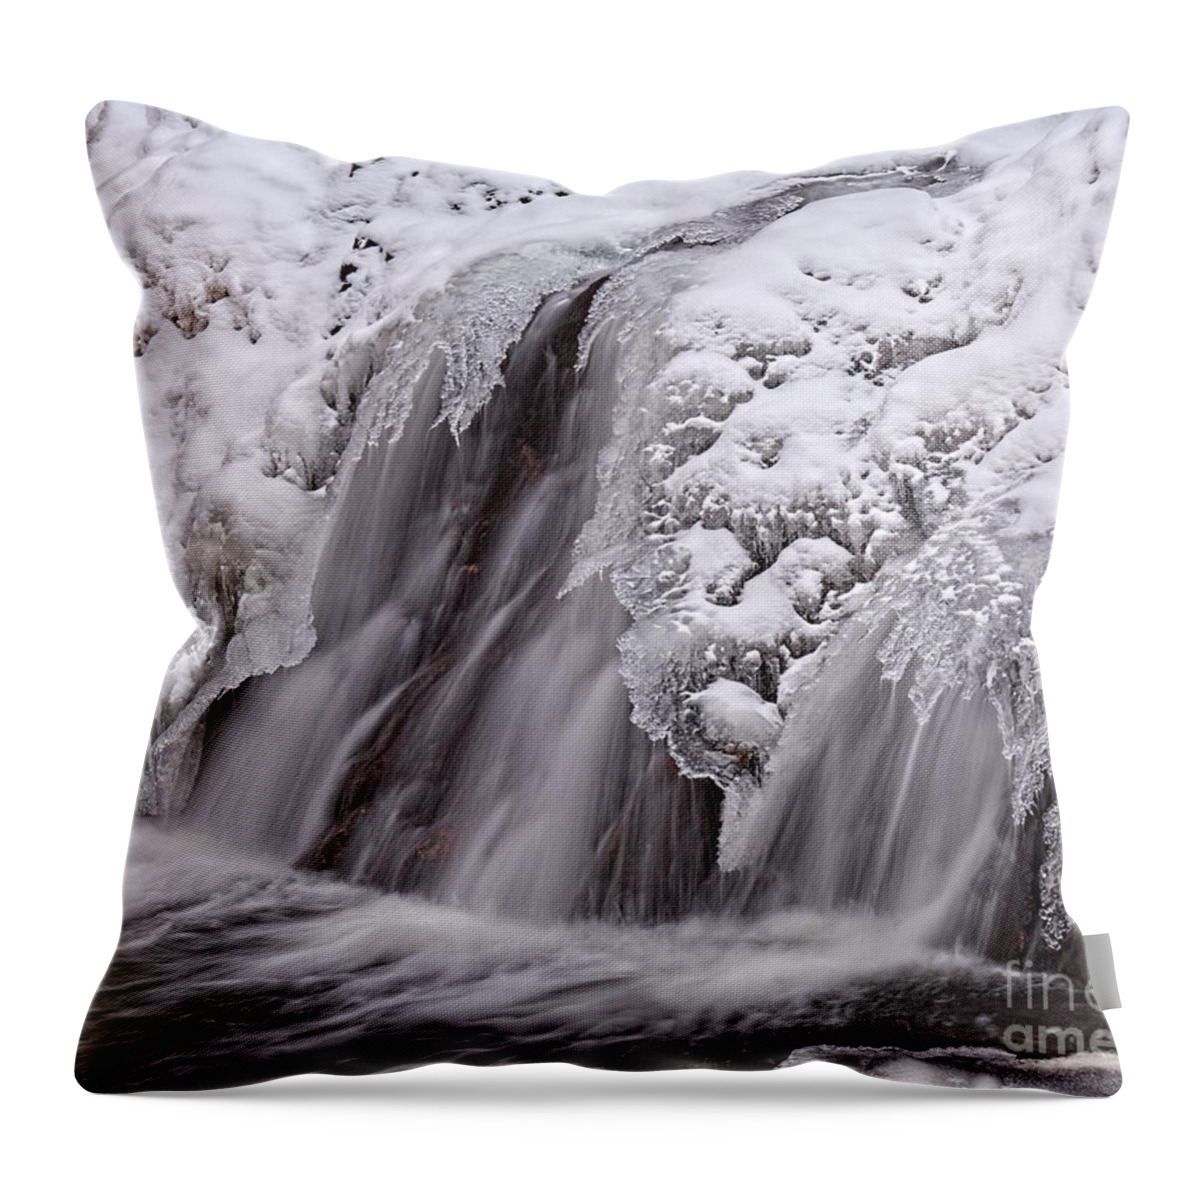 Frozen Waterfall Throw Pillow featuring the photograph The Crystal Falls by Jim Garrison